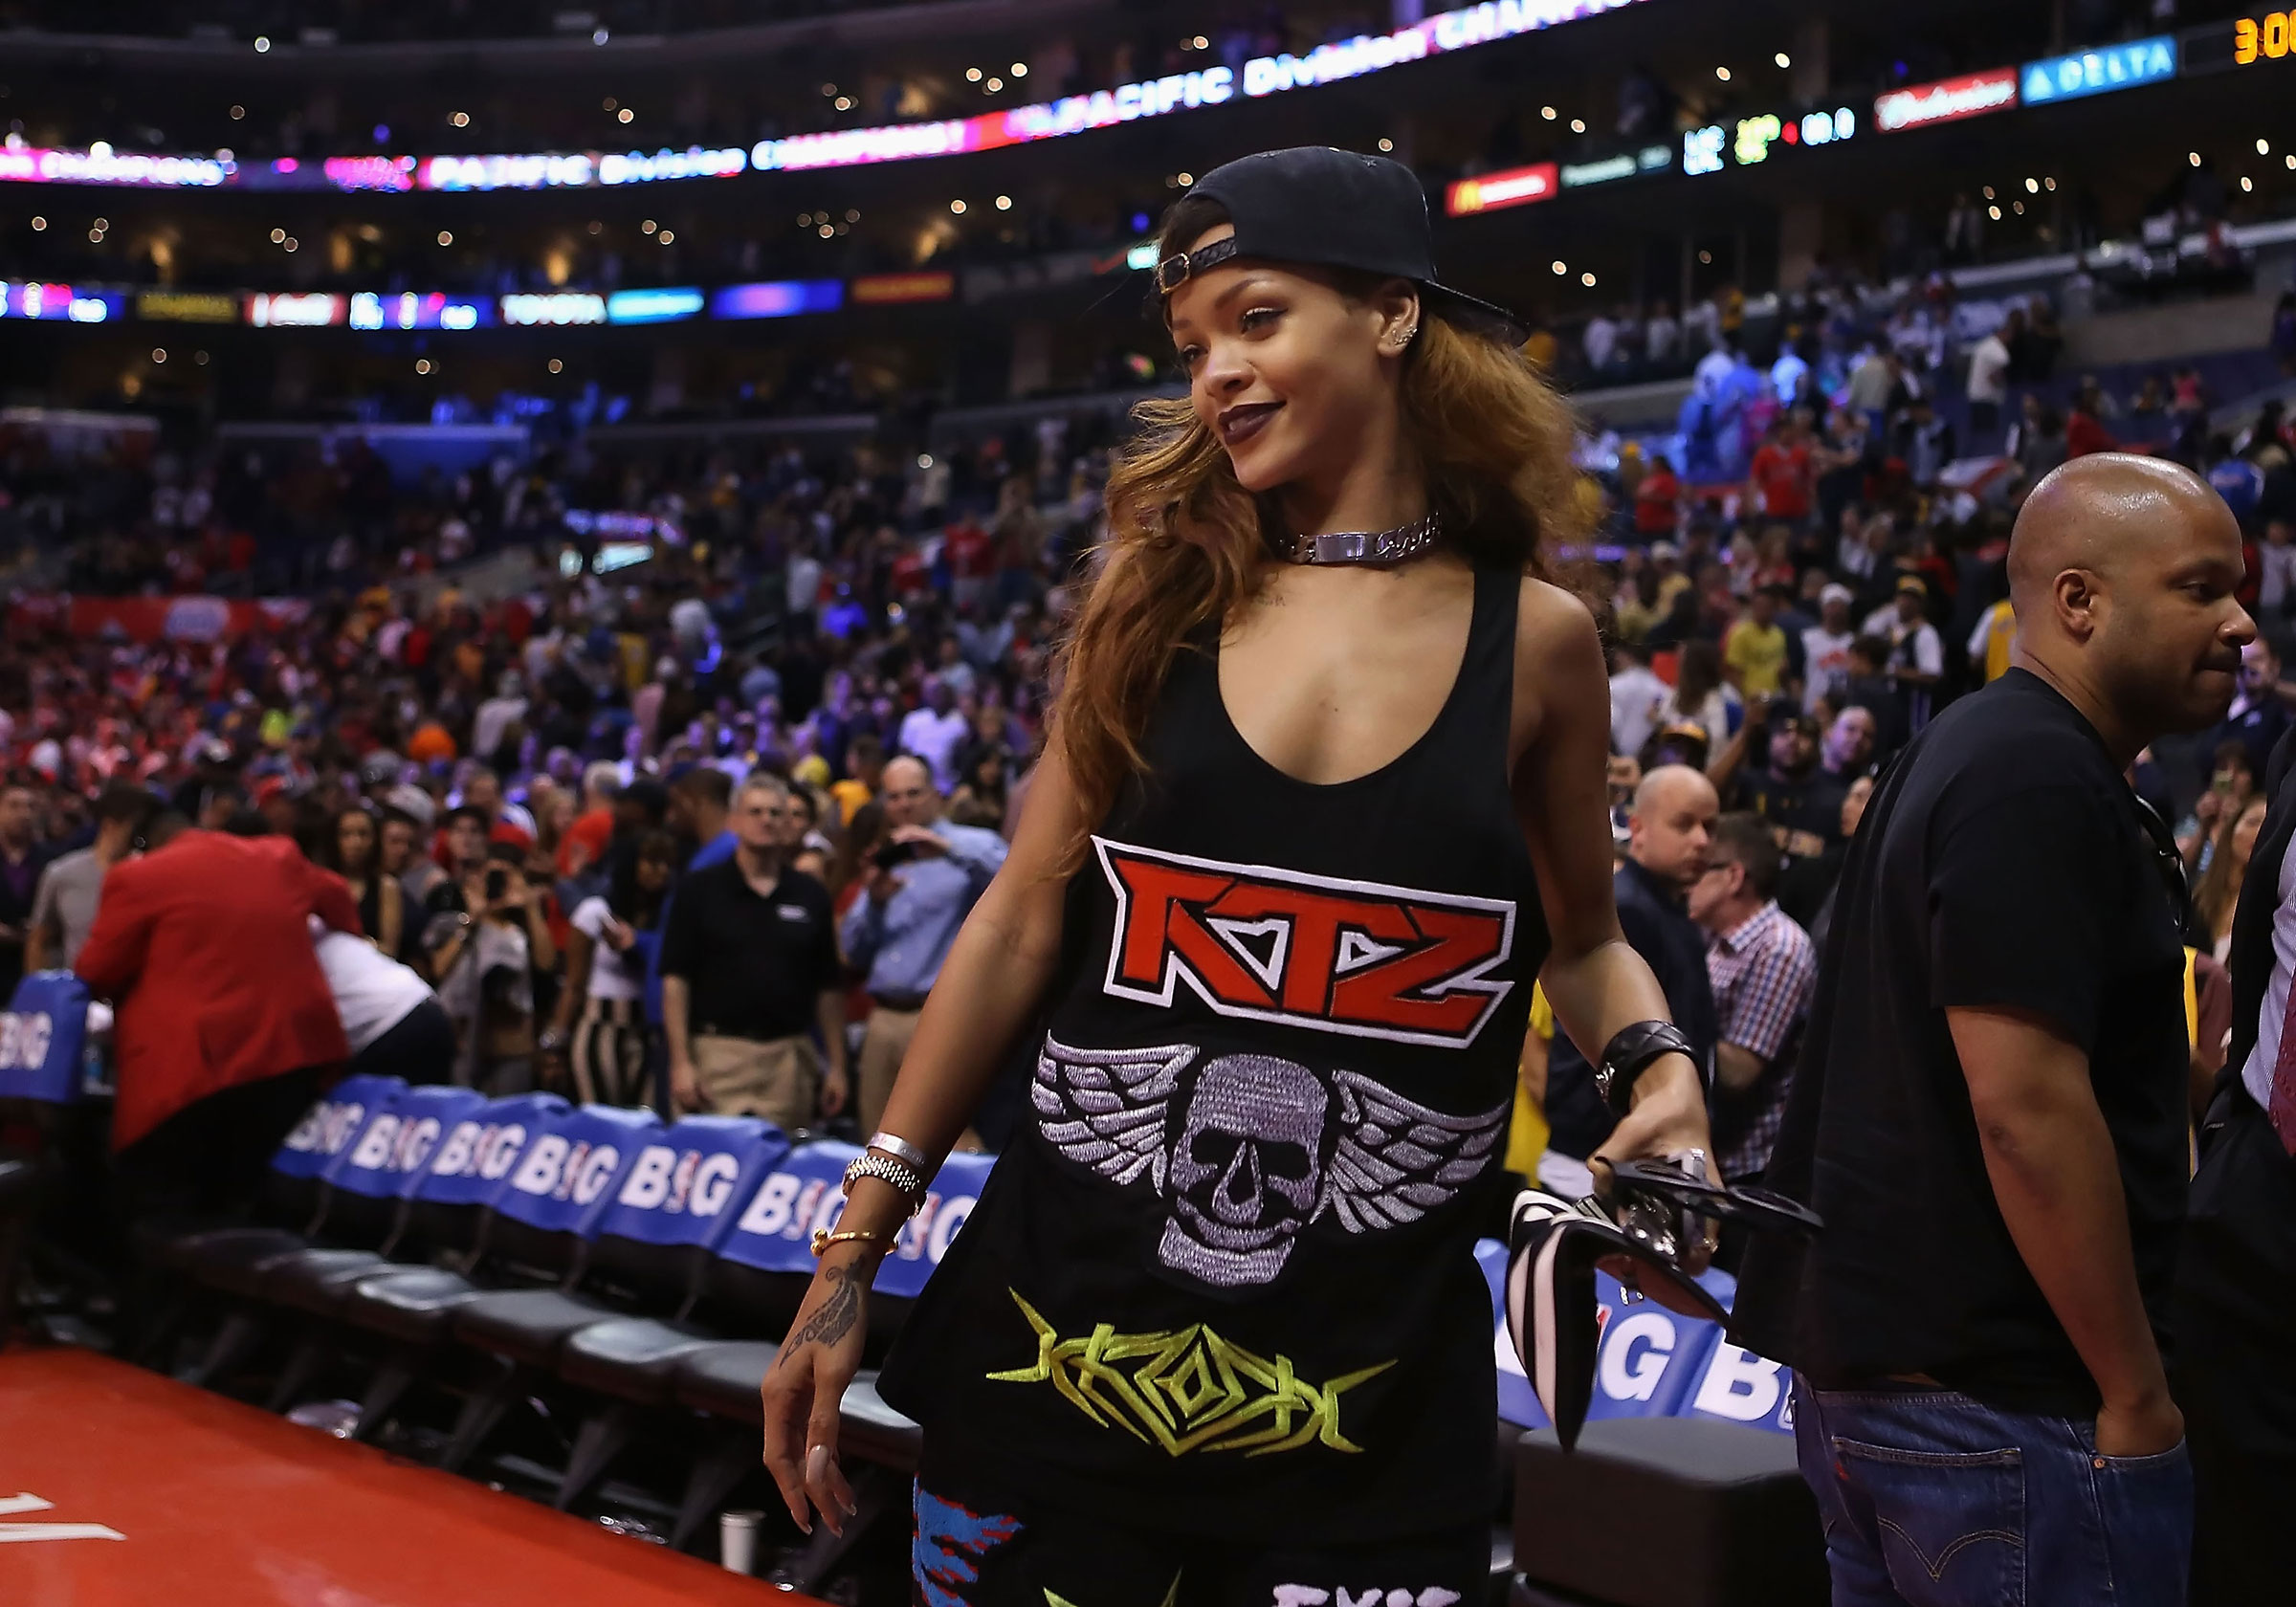 Rihanna walks off the court following the NBA game between the Los Angeles Lakers and the Los Angeles Clippers in Los Angeles, on April 7, 2013. (Christian Petersen—Getty Images)